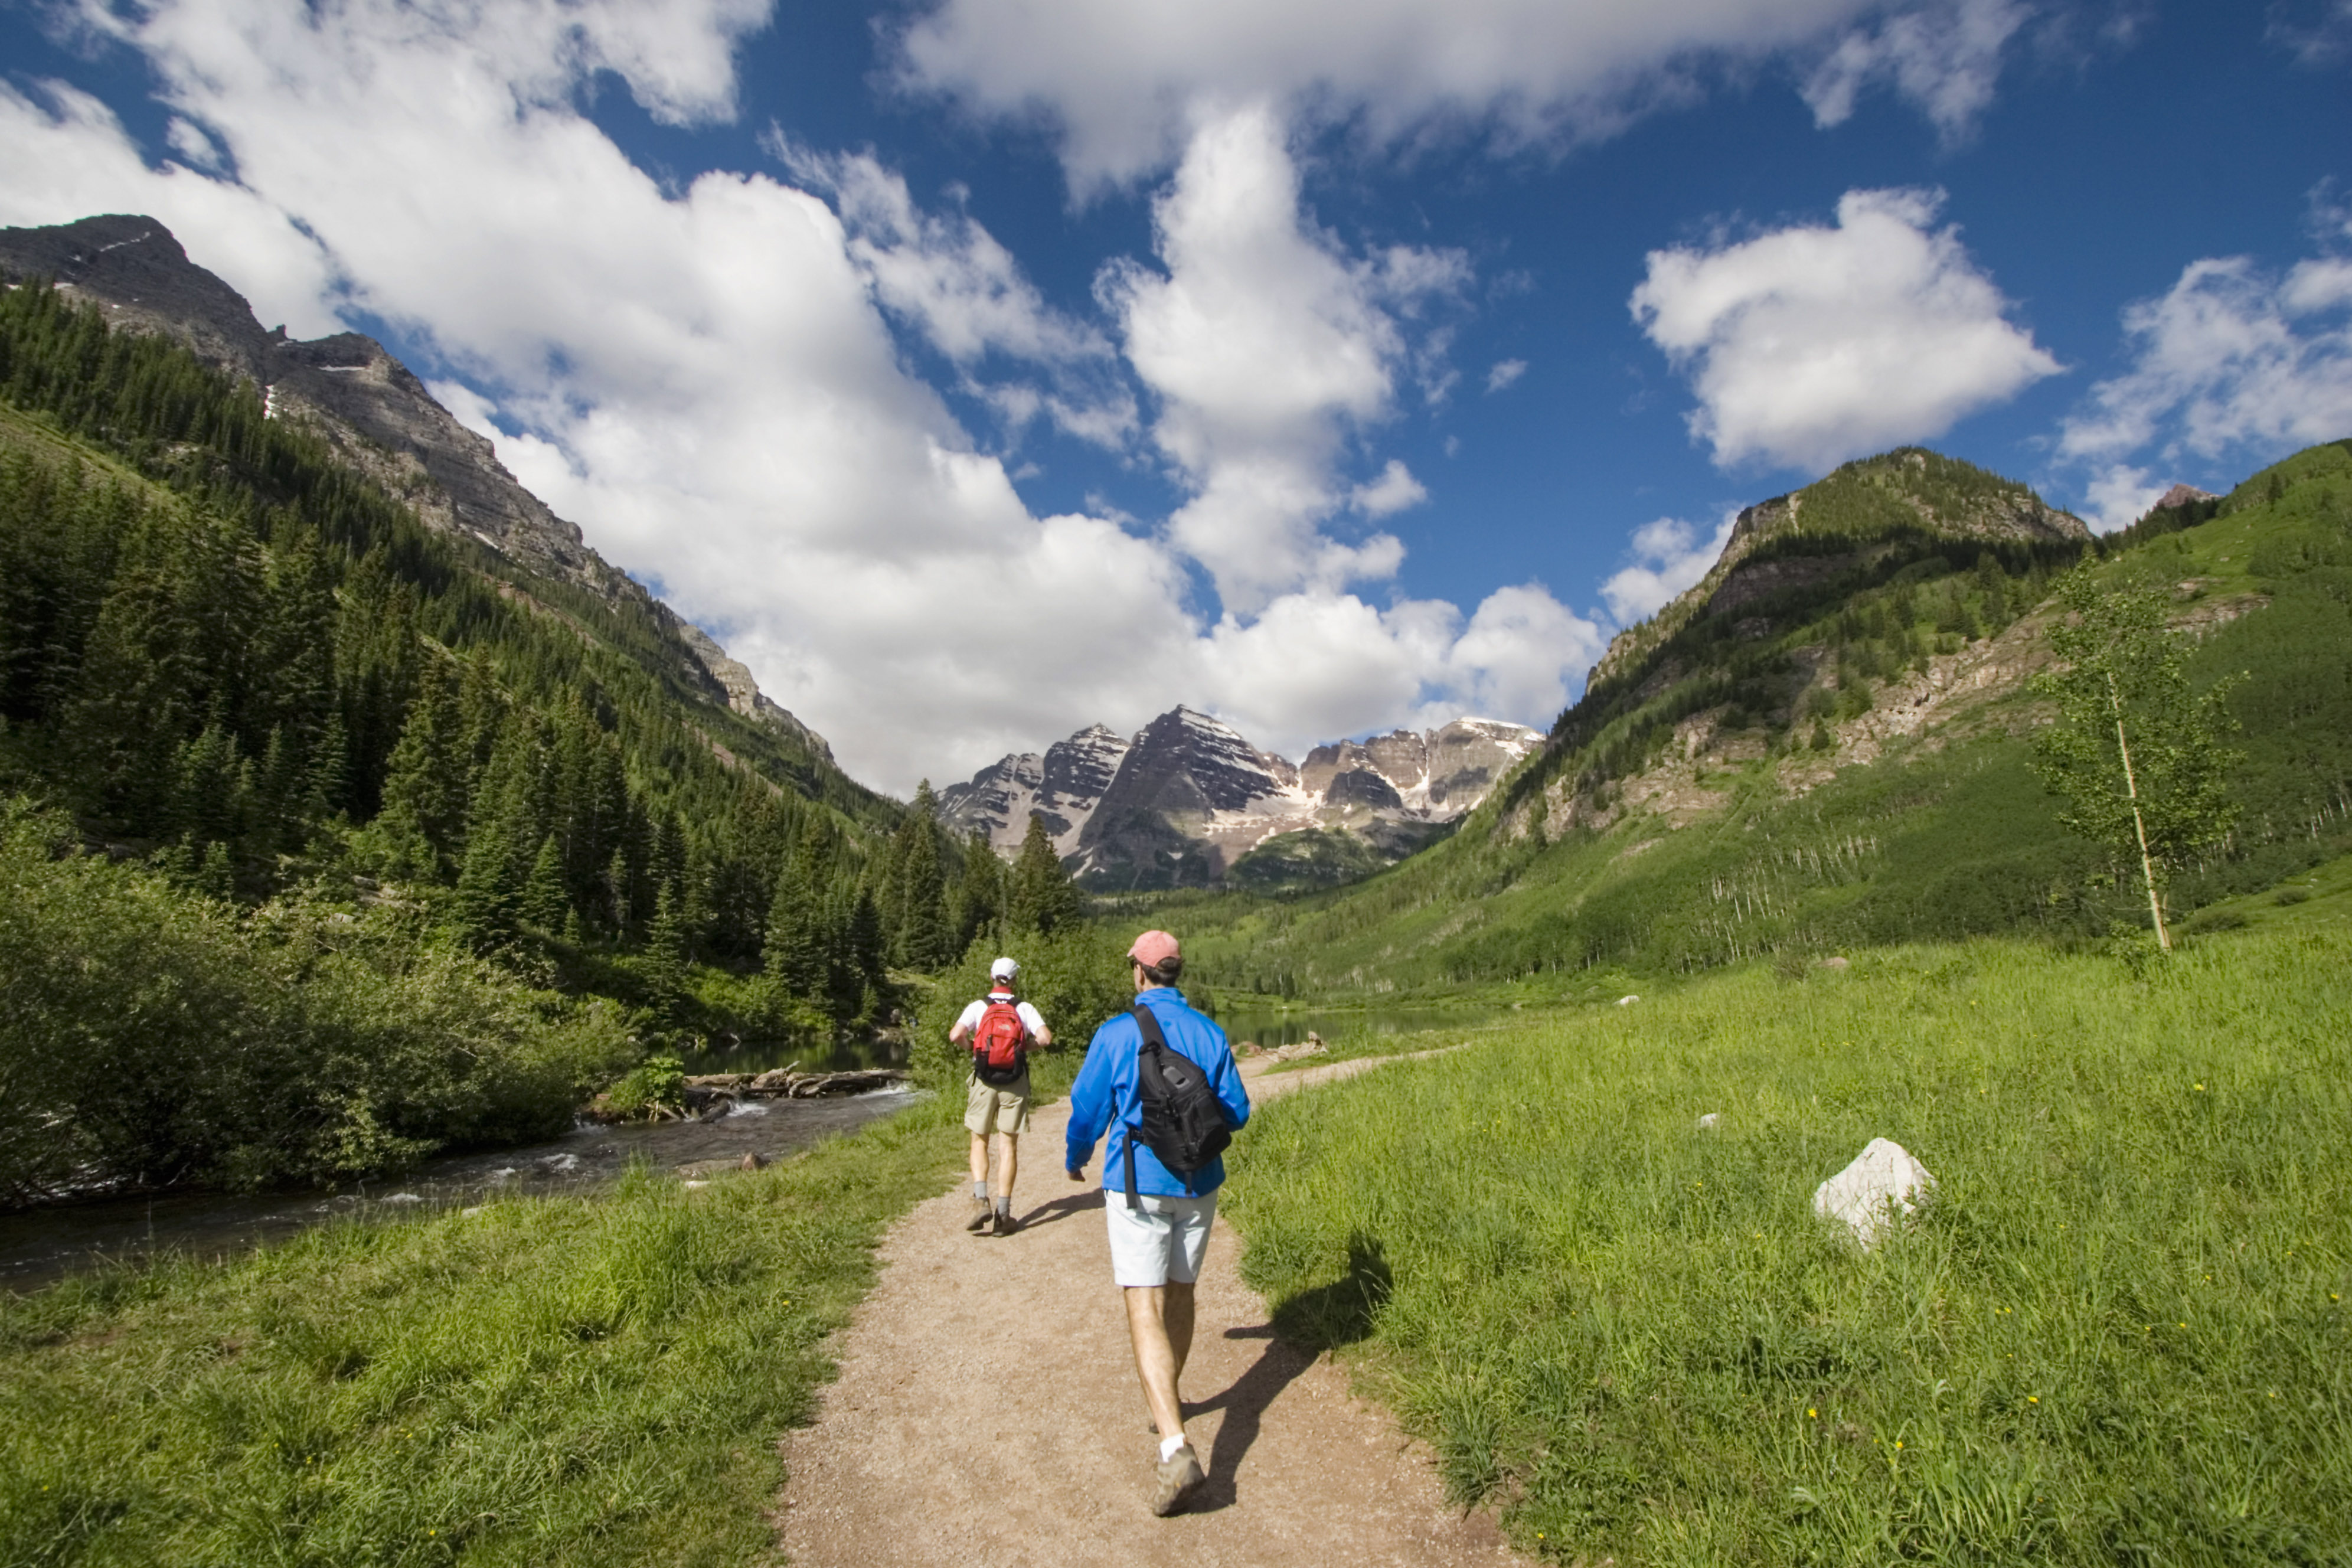 Hikers ascending the trail to the Maroon Bells. Image by John Kieffer / Getty